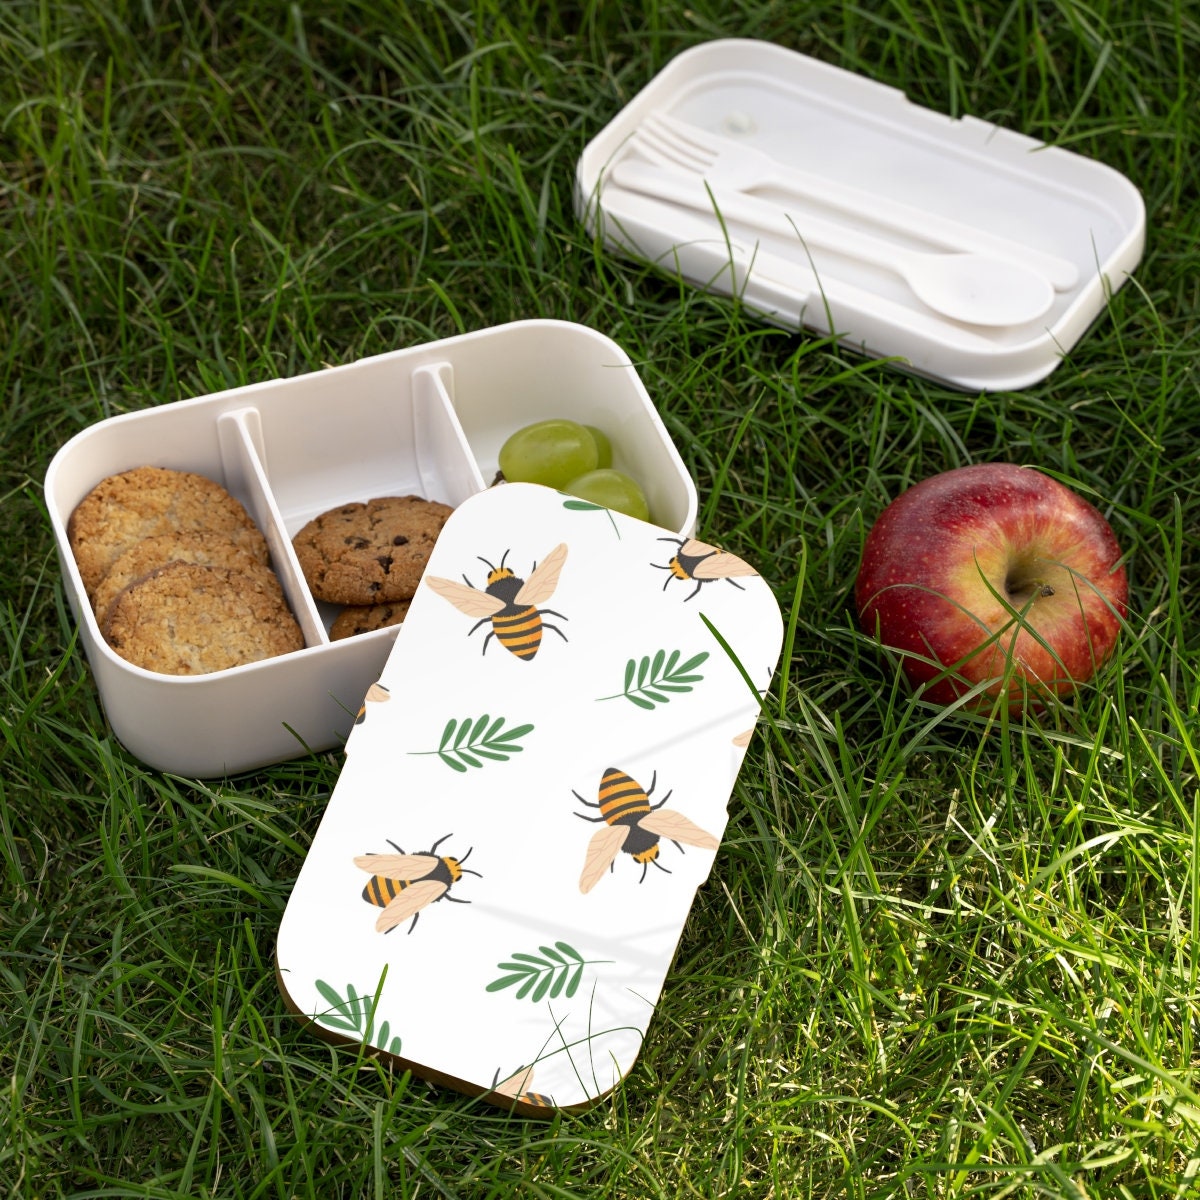 TP-990-T186 Tupperware Executive Lunch (Including Bag) With Small Bowls and  Large Bowls allows you to Pack a Complete Lunch